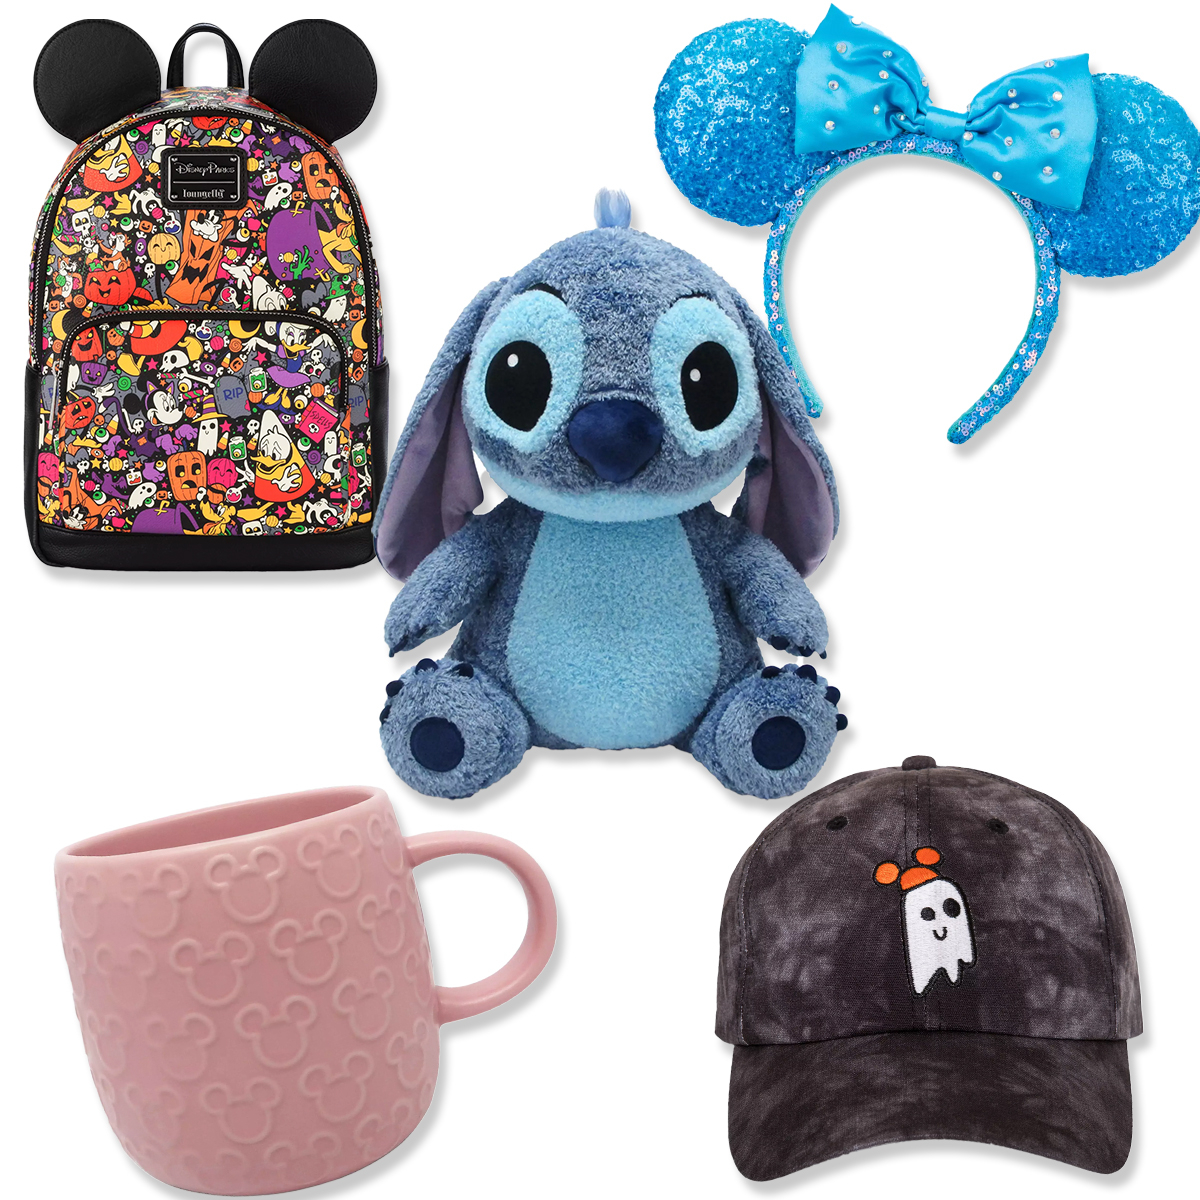 Disney Is Selling A Stitch Mug Complete With A Spoon and It Is Adorable